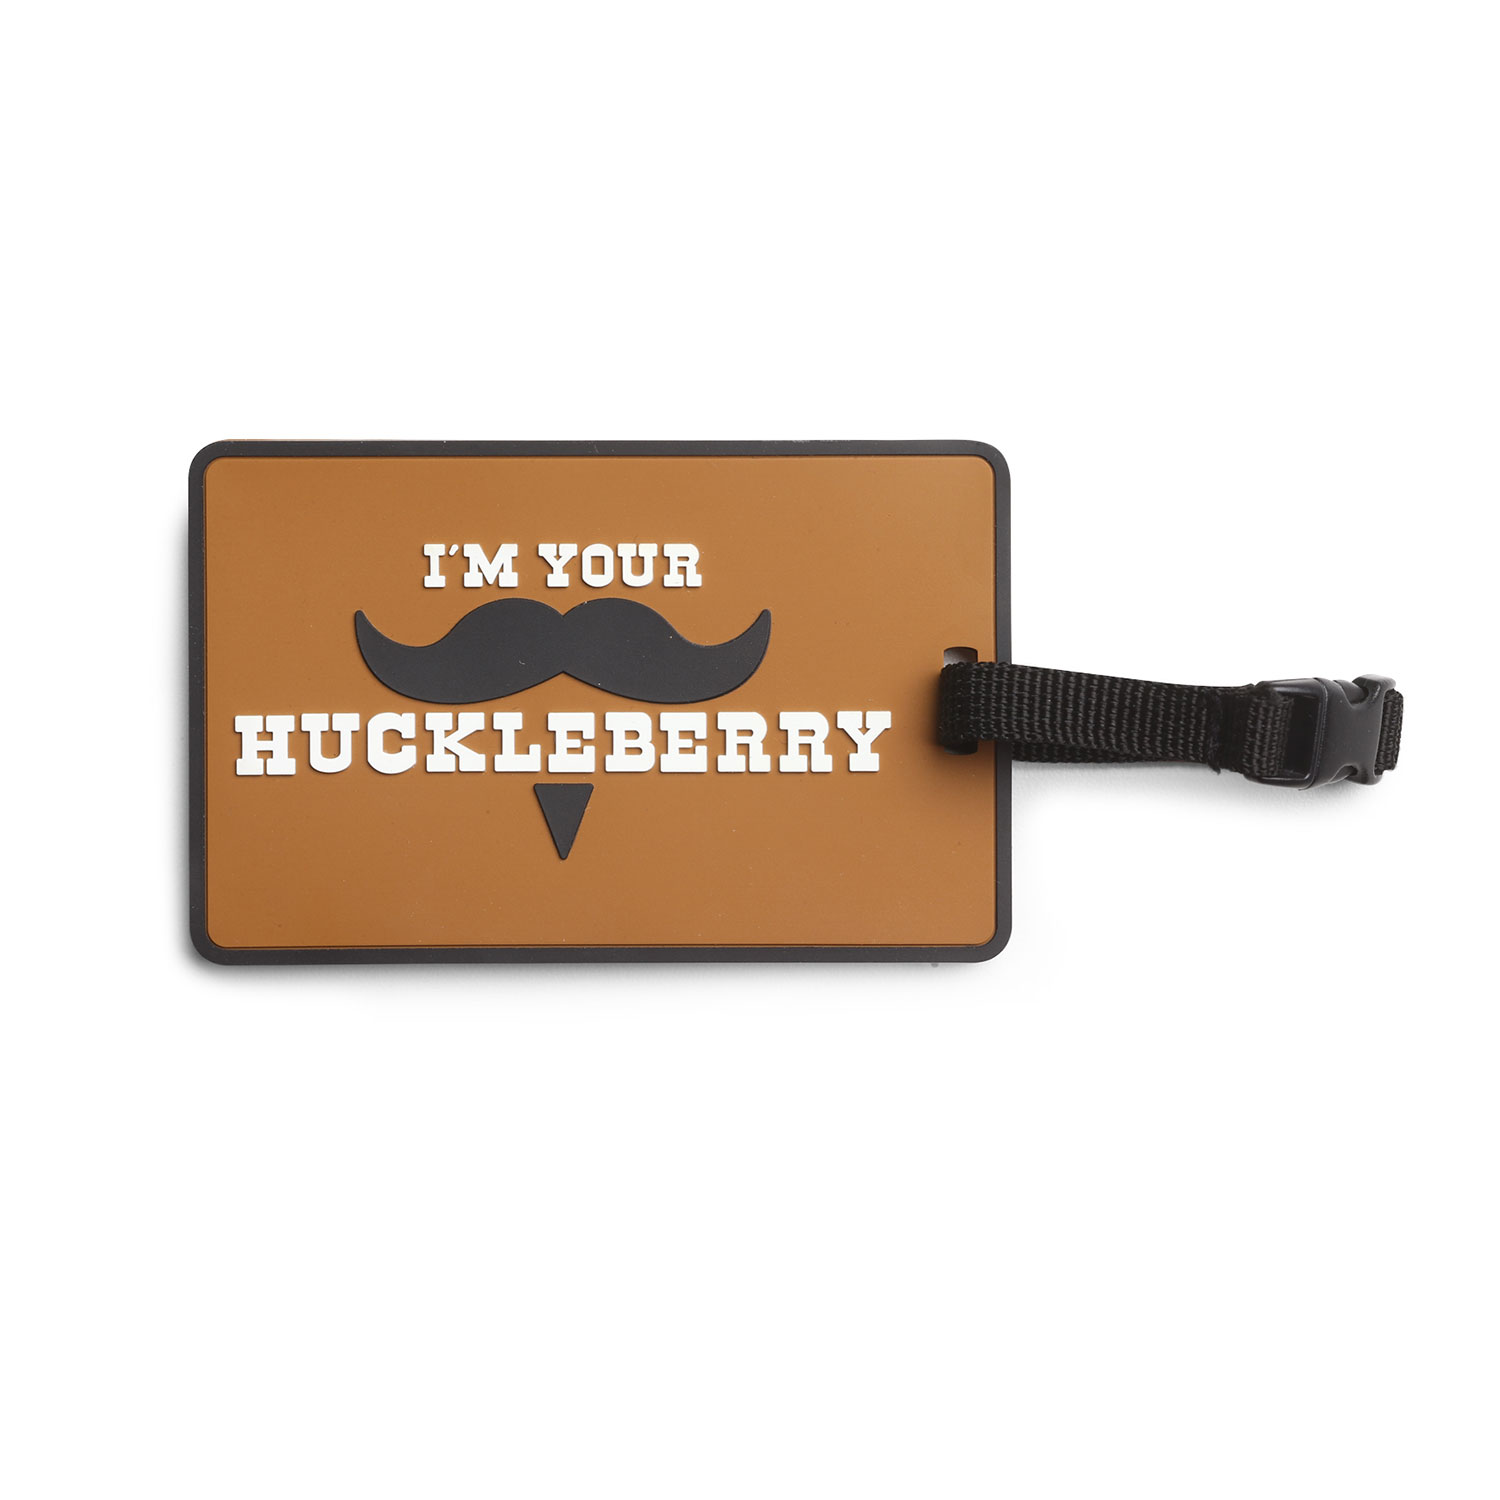 5ive Star Gear “I’m Your Huckleberry” Luggage Tag